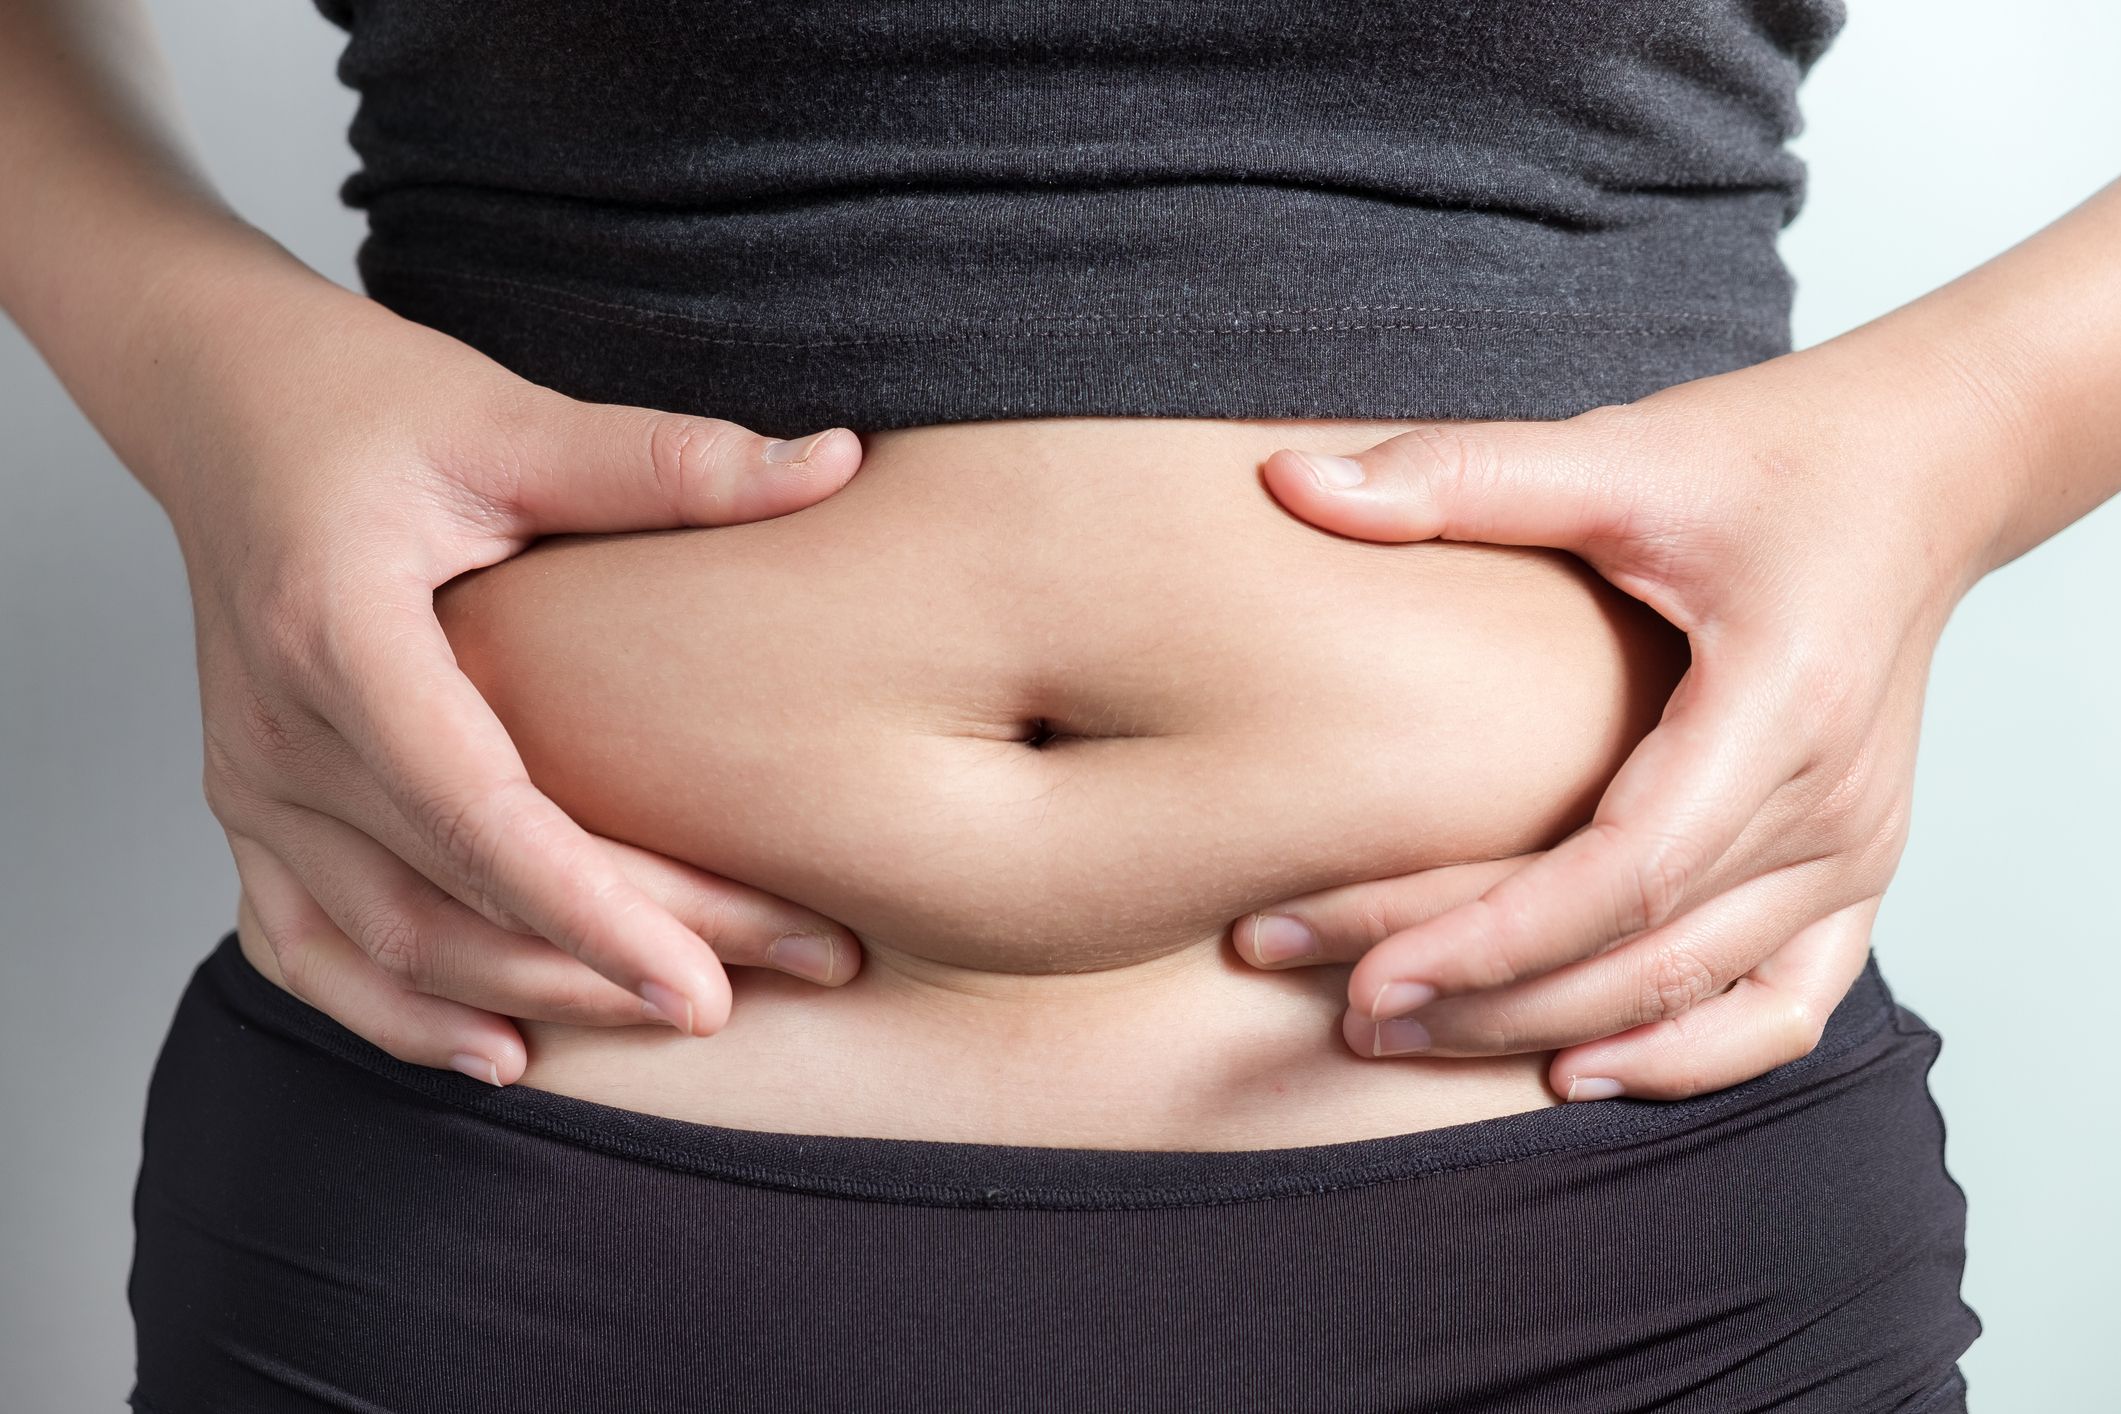 Bloated stomach: causes, remedies and prevention tips